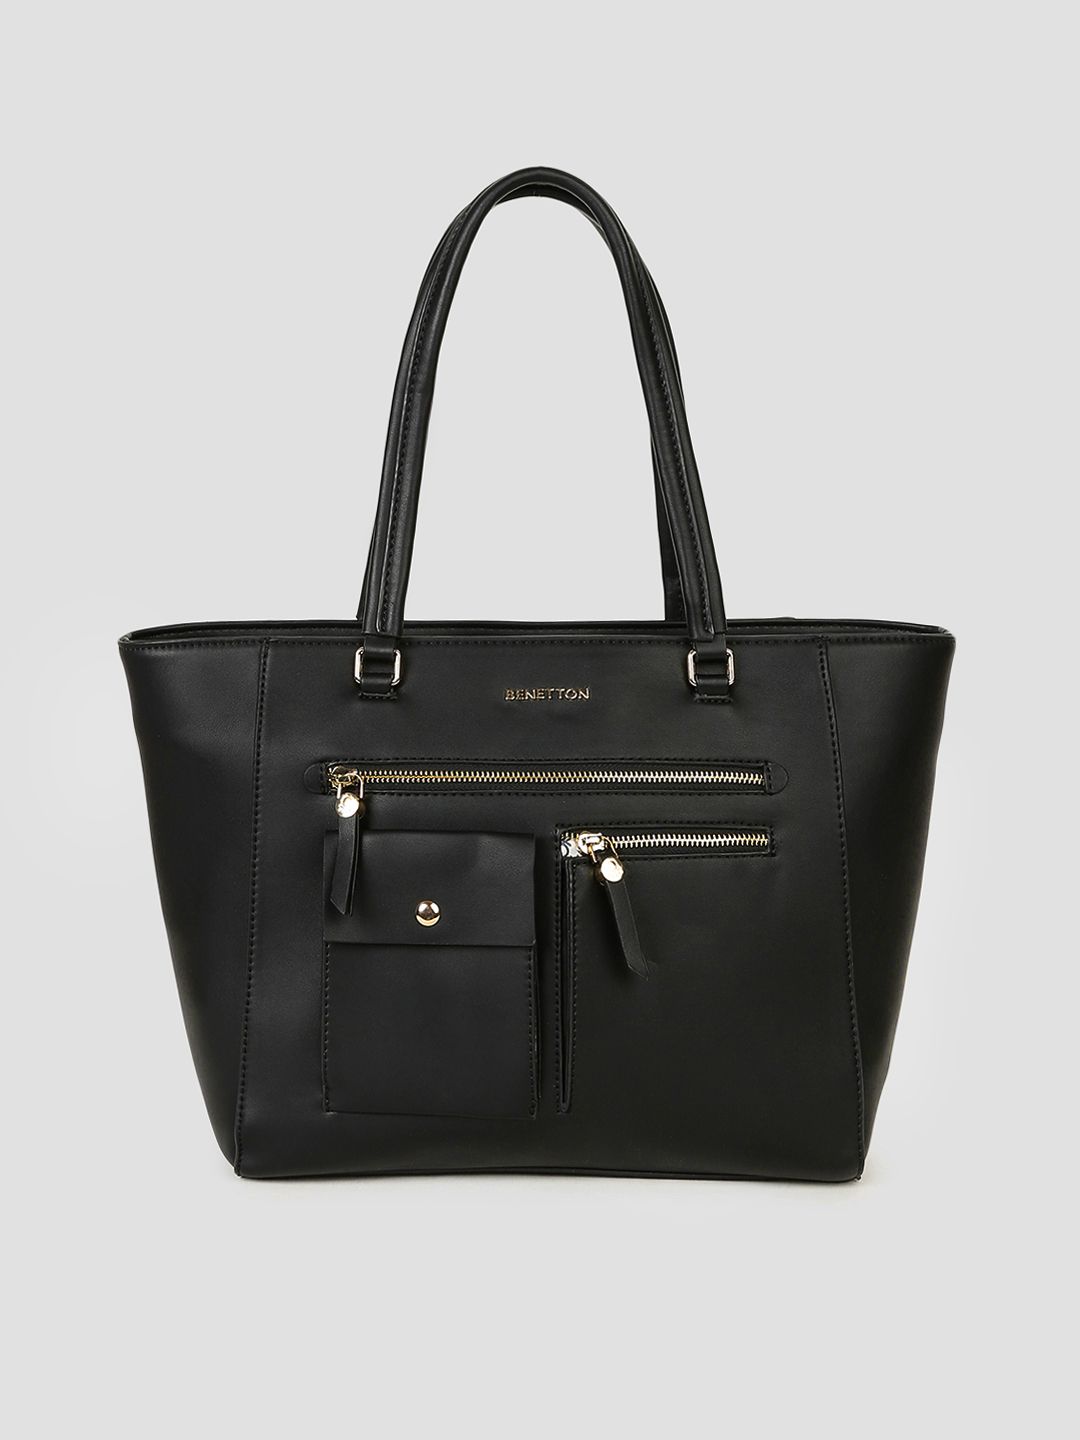 United Colors of Benetton Black Shoulder Bag Price in India